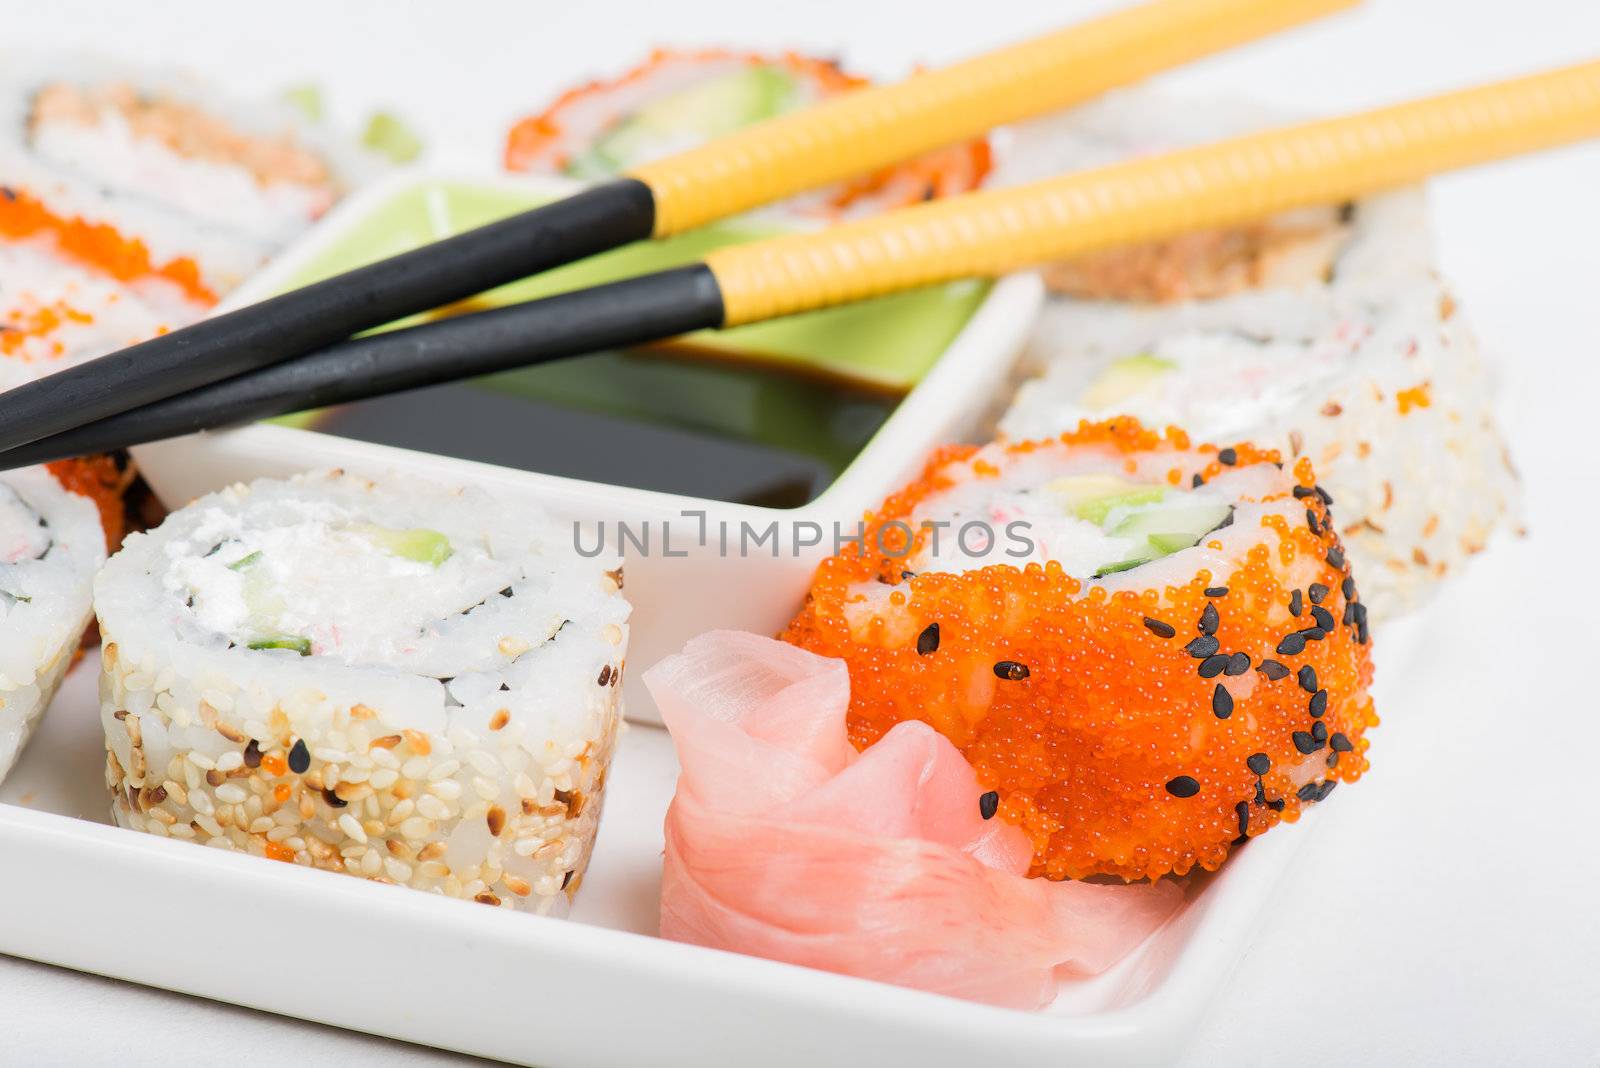 Soy sauce, chopsticks and sushi mix on the plate